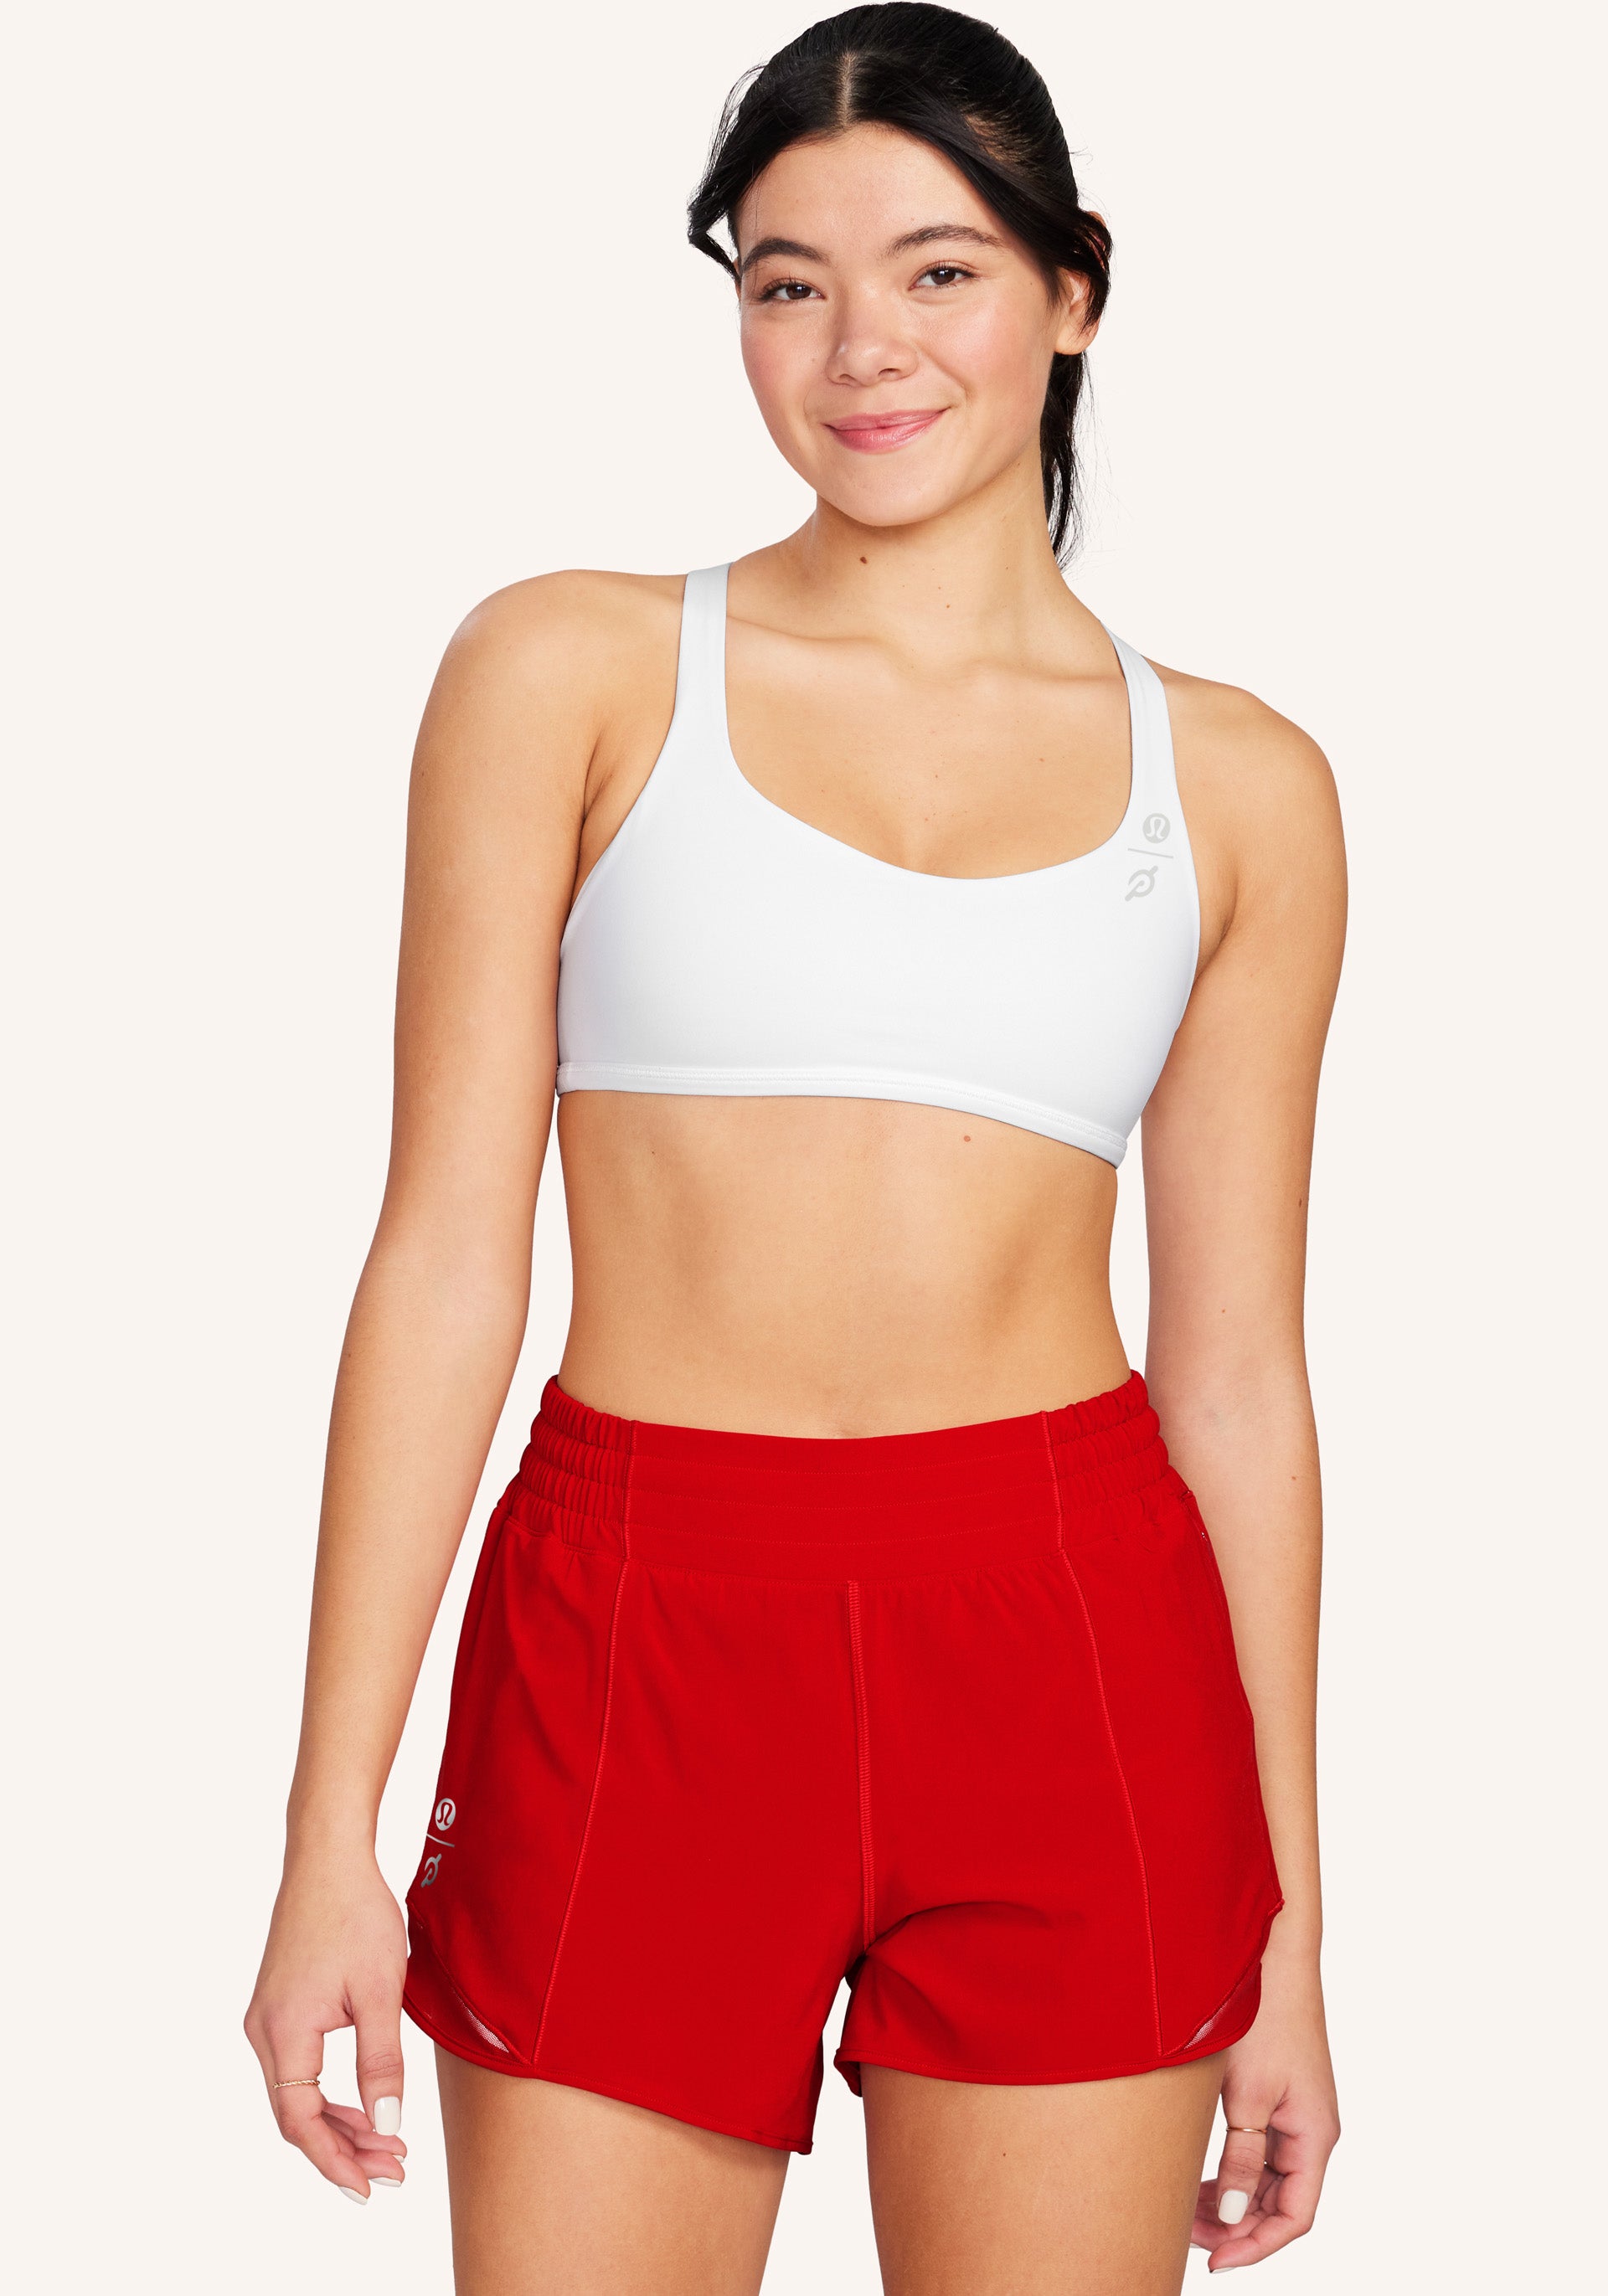 https://apparel.onepeloton.ca/cdn/shop/files/FreetoBeBra_Wild-White-size-00-size-0-size-2-size-4-size-6-size-8-size-10-size-12-size-14-1-front-pdp-hide_1920x.jpg?v=1704389609